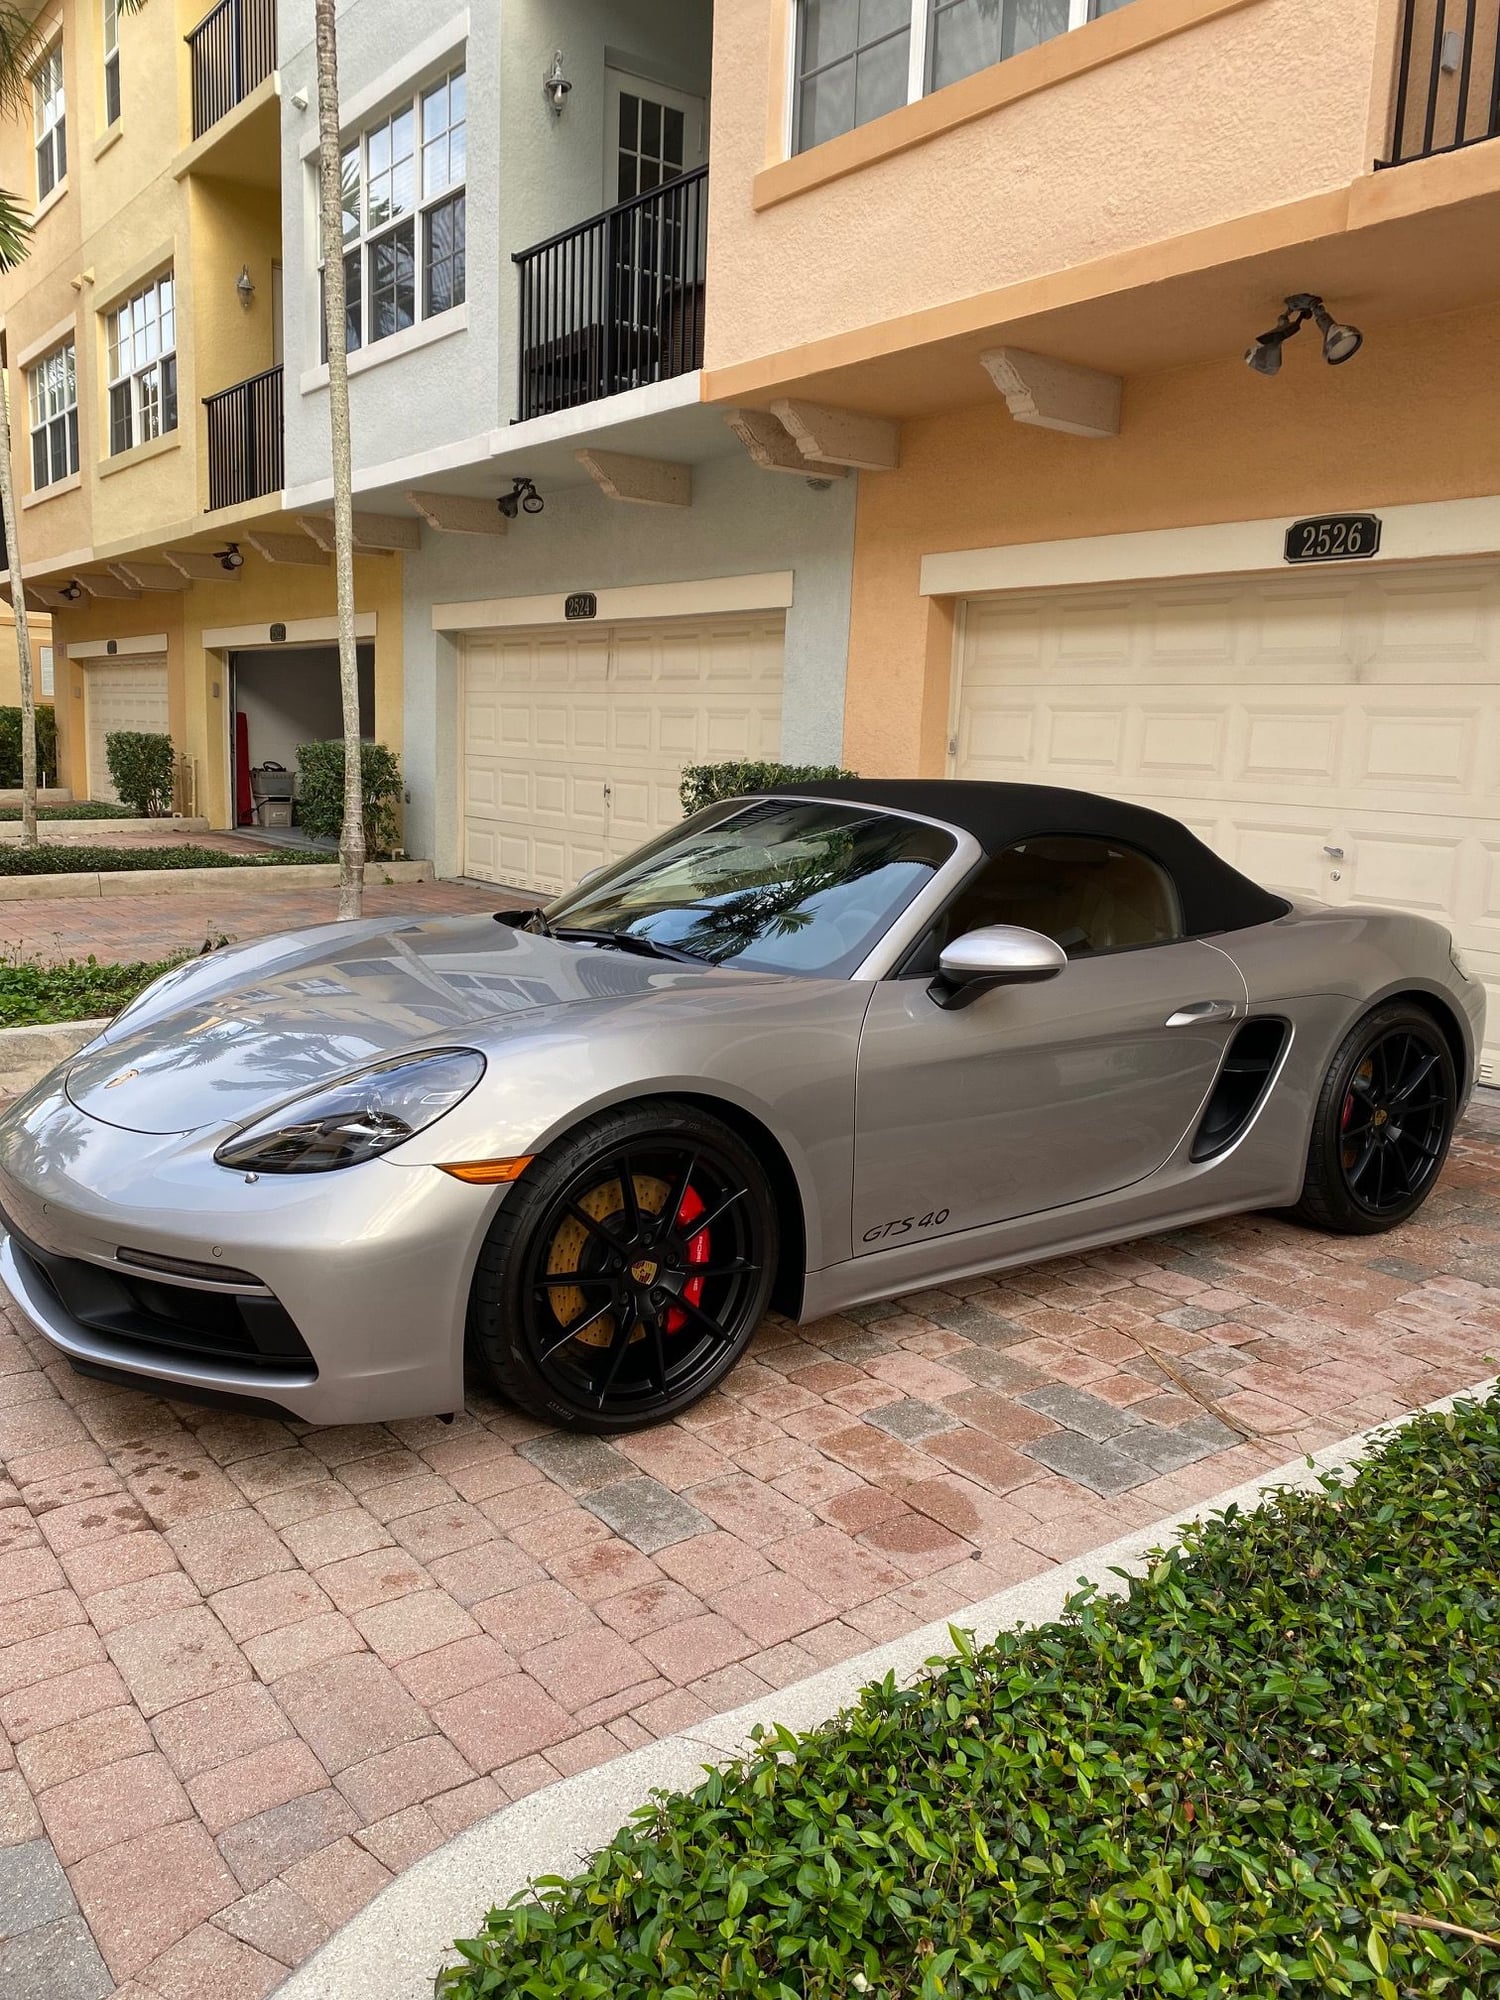 2021 Porsche 718 Boxster - 2021 Boxster GTS 4.0 GT Silver - Used - VIN WP0CD2A82MS232577 - 3,950 Miles - 6 cyl - 2WD - Automatic - Convertible - Silver - Palm Beach Gardens, FL 33410, United States